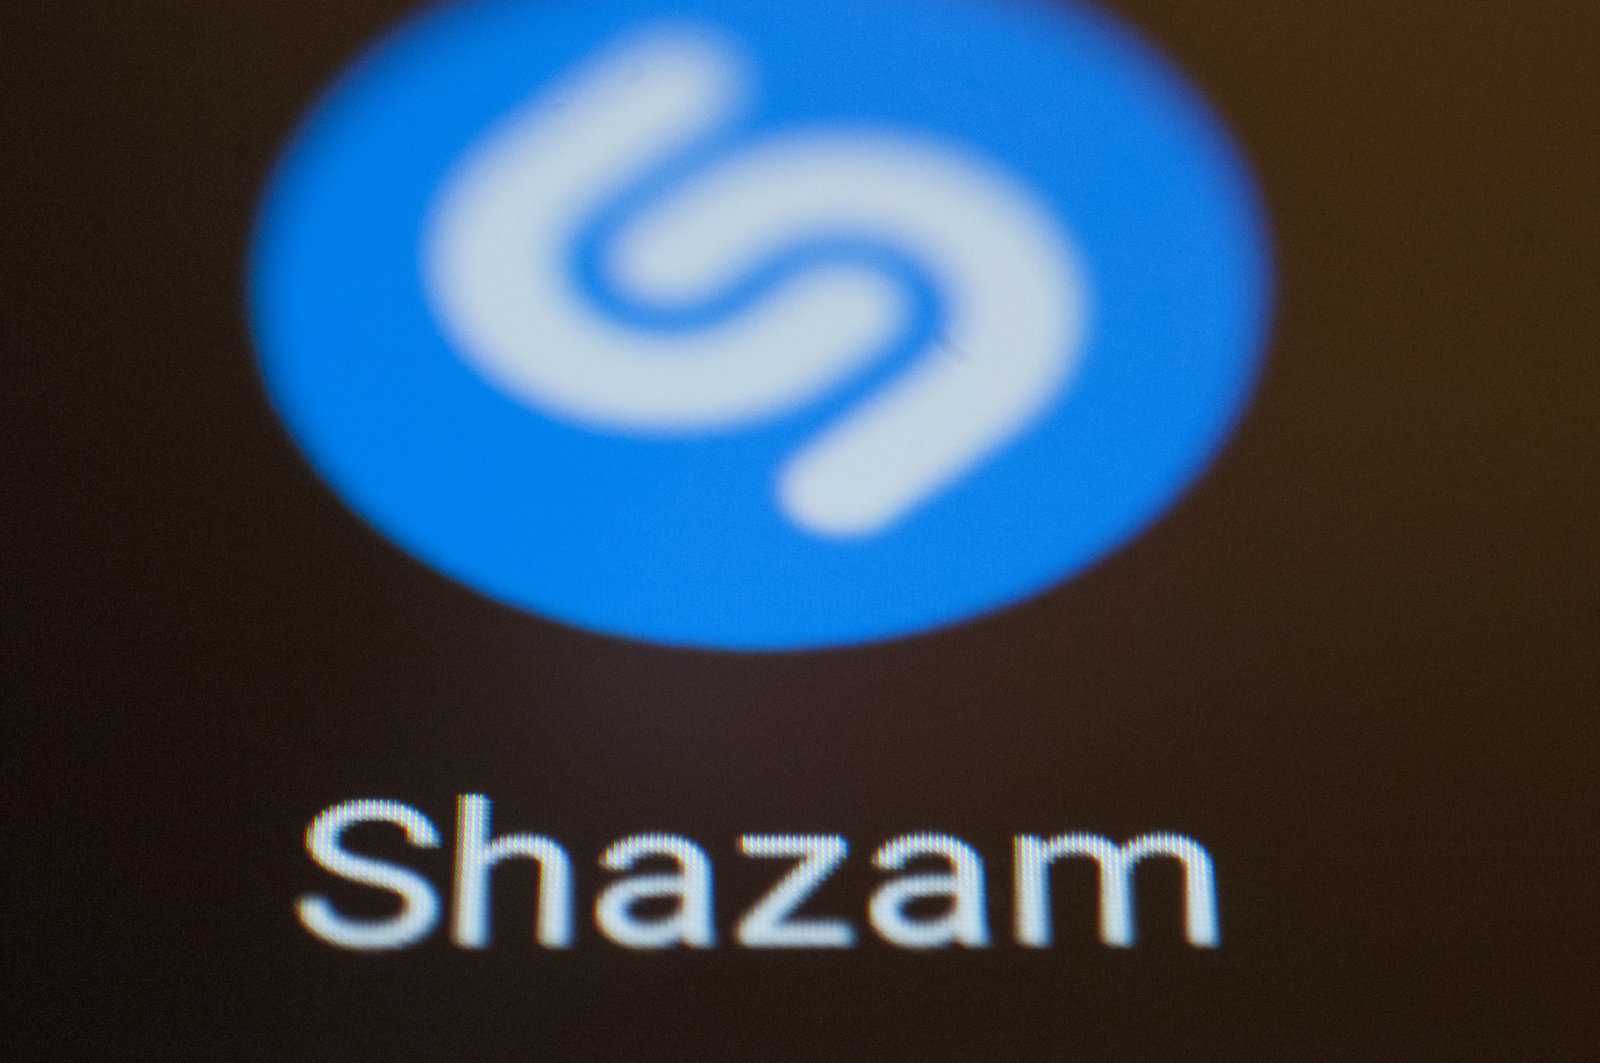 A Shazam music recognition app is seen on an Android portable device on February 5, 2018. (Photo by Jaap Arriens/NurPhoto via Getty Images)